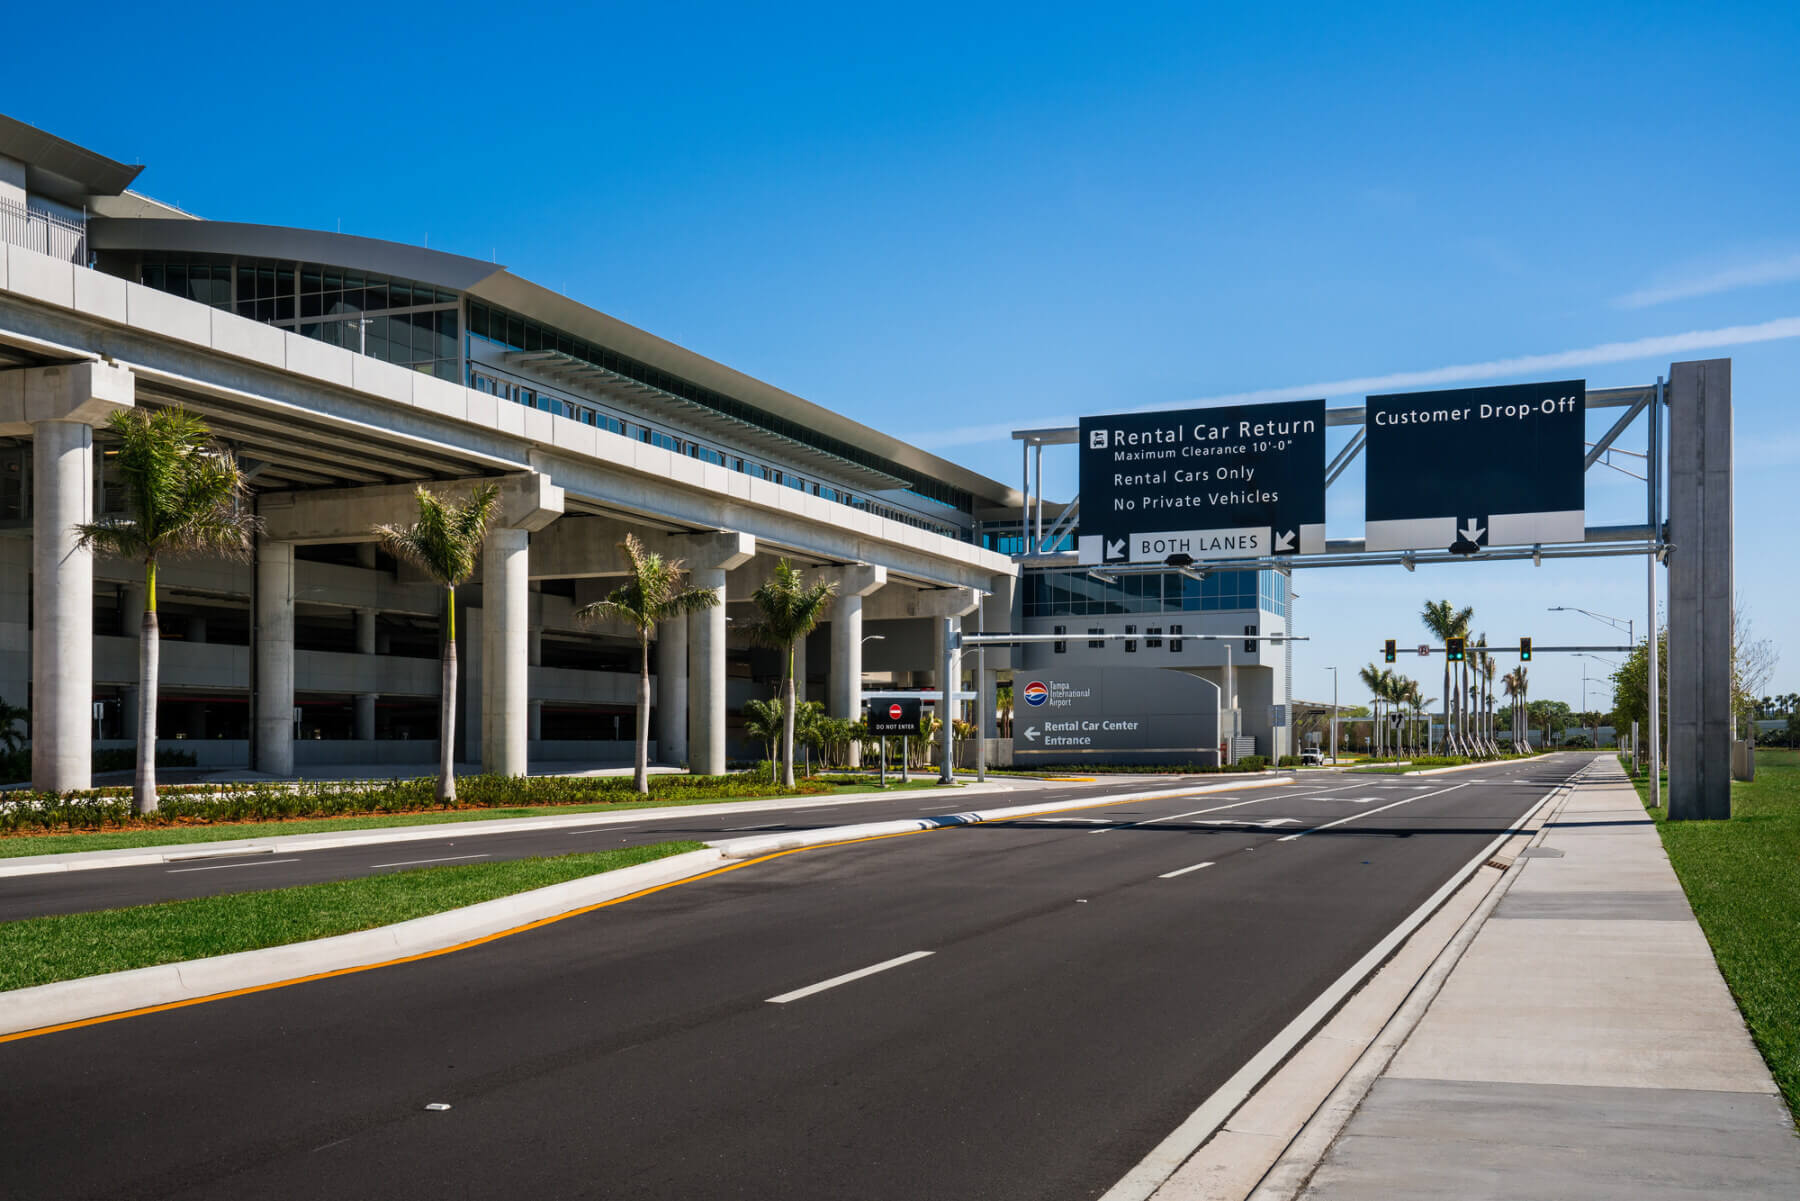 overhead signage on the roadway at Tampa International Airport